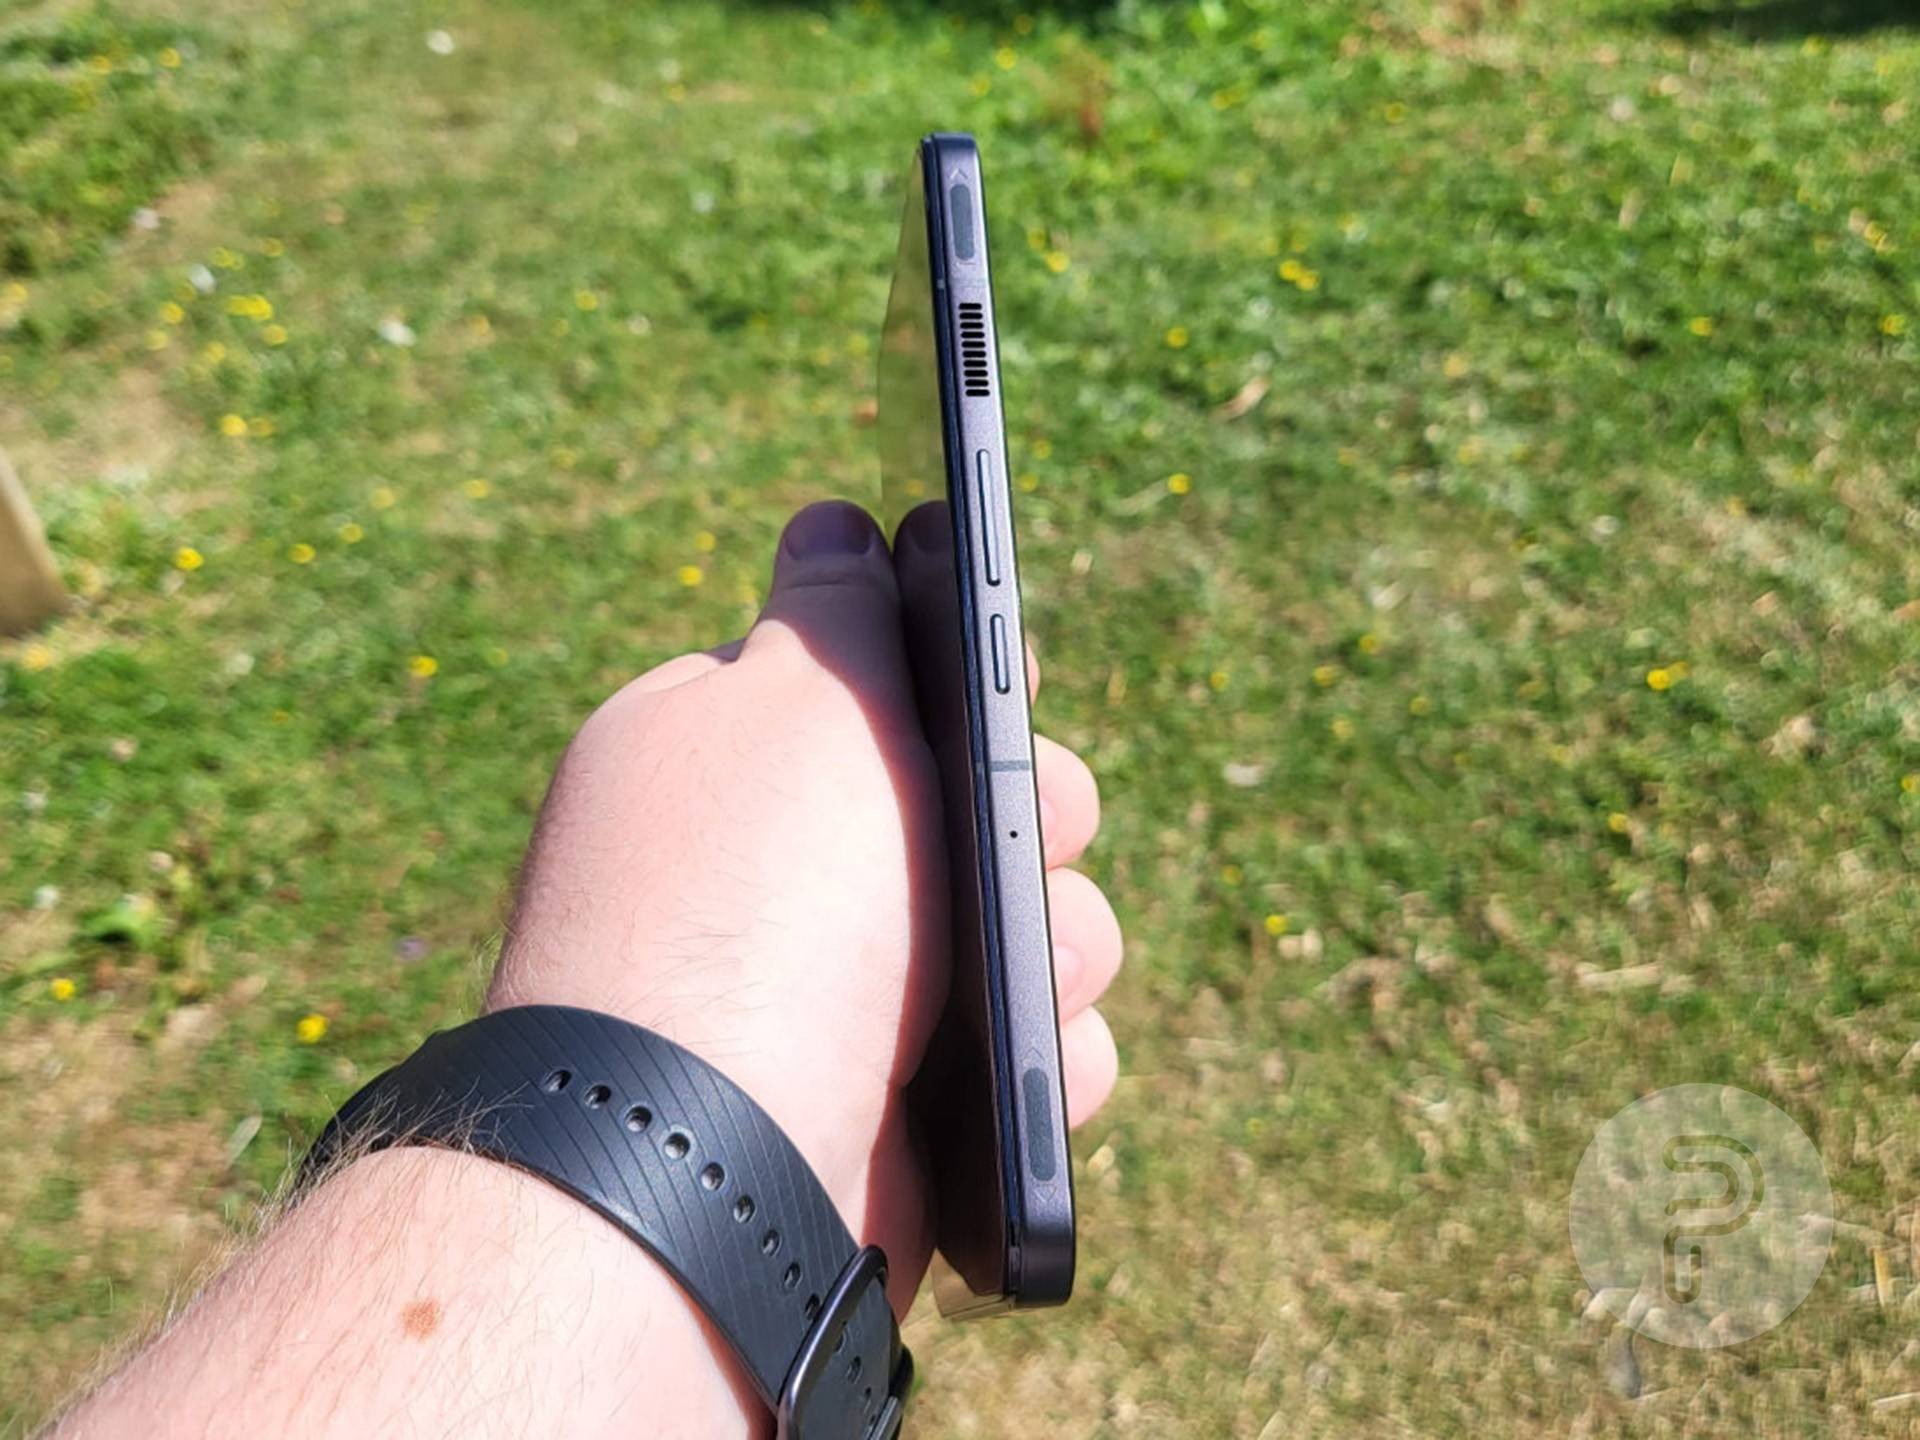 nubia REDMAGIC 7S Pro right side of the device showing the volume rocker, power button and shoulder triggers